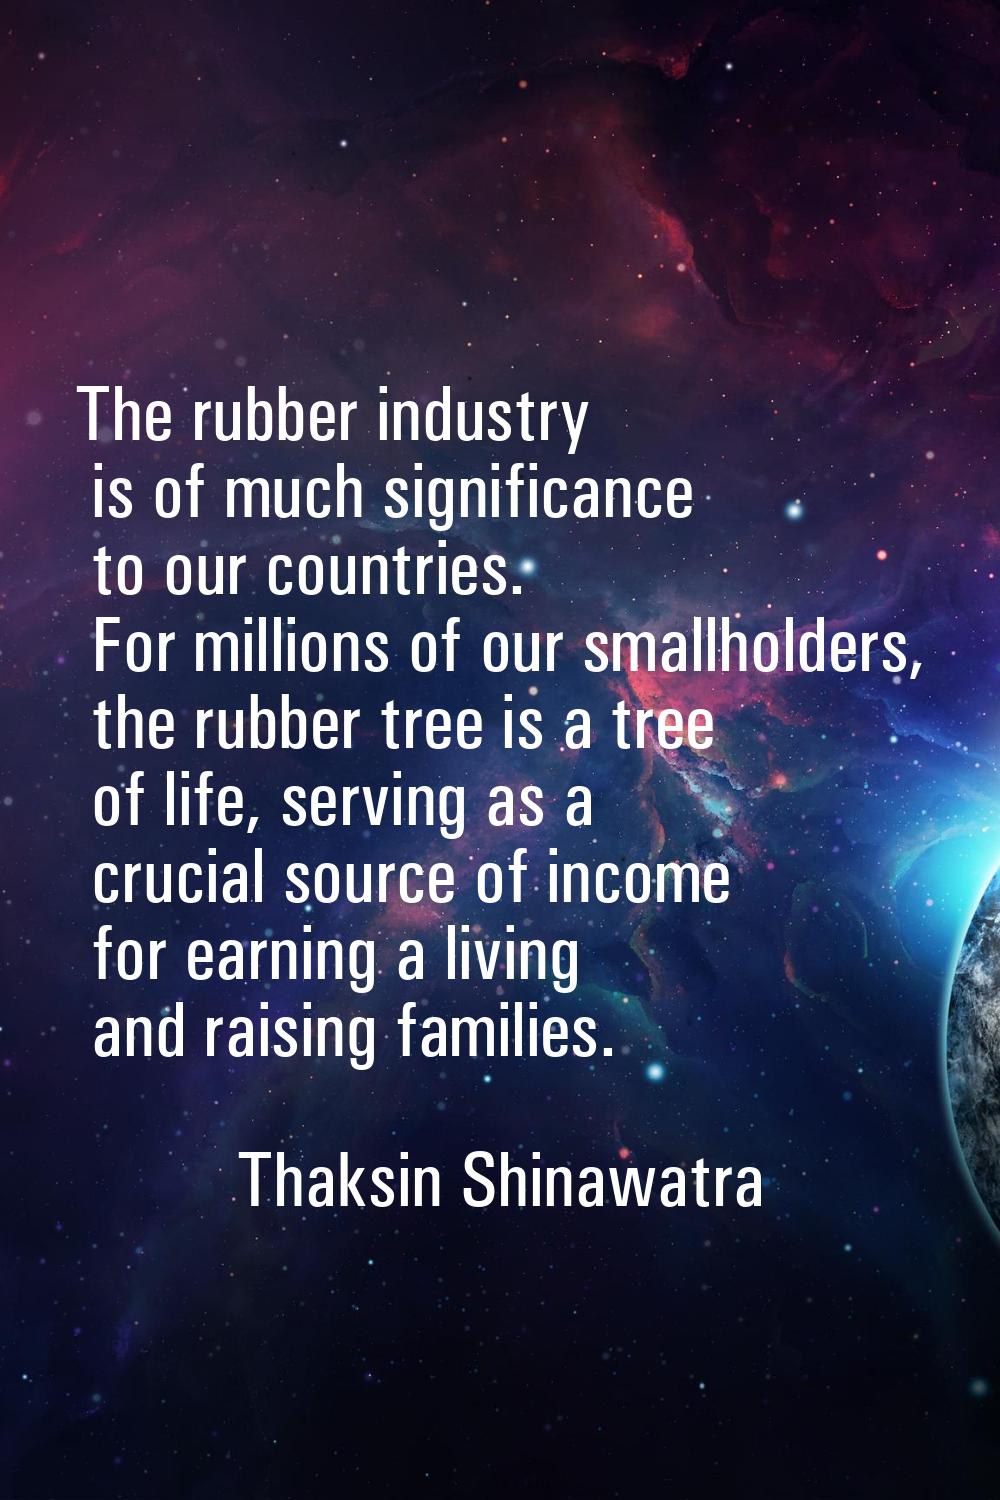 The rubber industry is of much significance to our countries. For millions of our smallholders, the